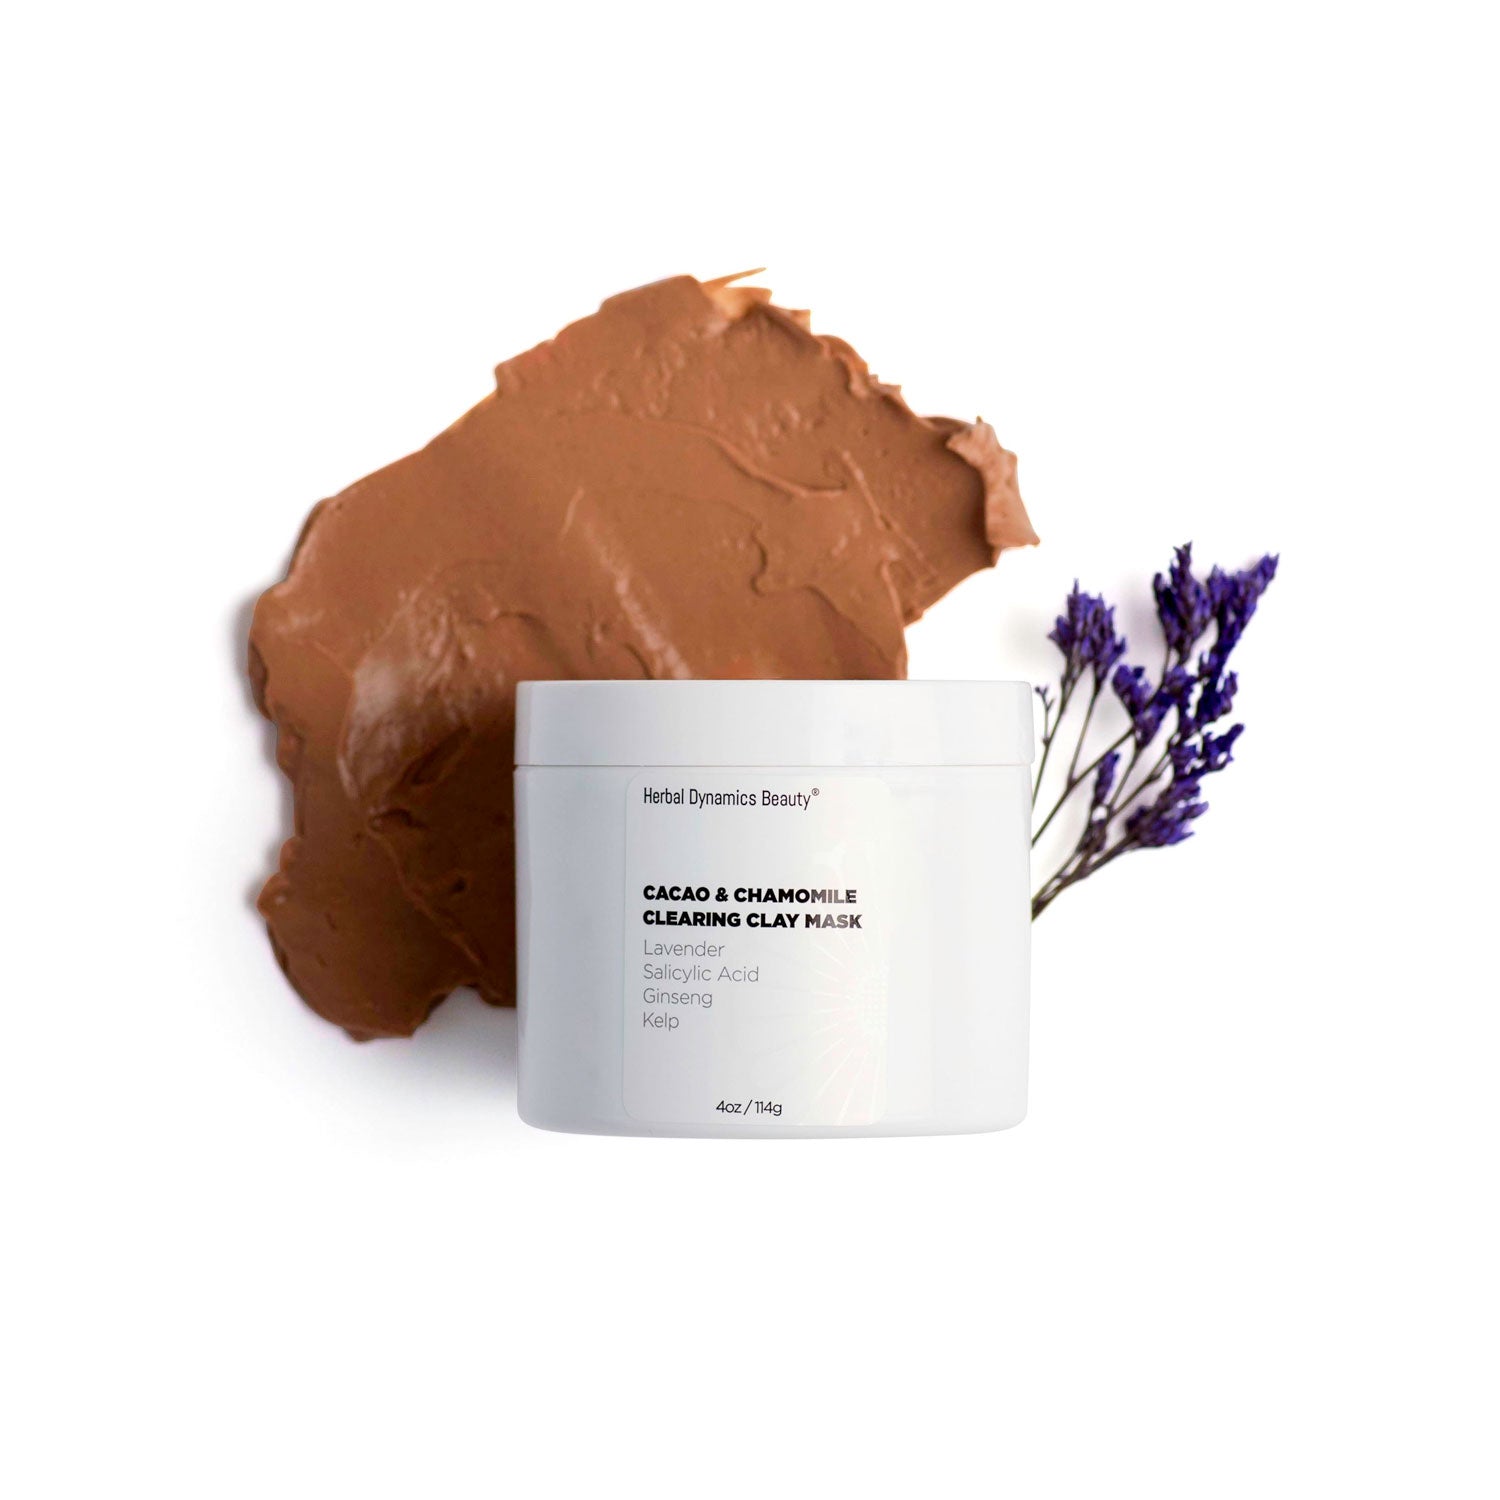 Herbal Dynamics Beauty® Intense Detox® Cacao & Chamomile Clearing Clay Mask